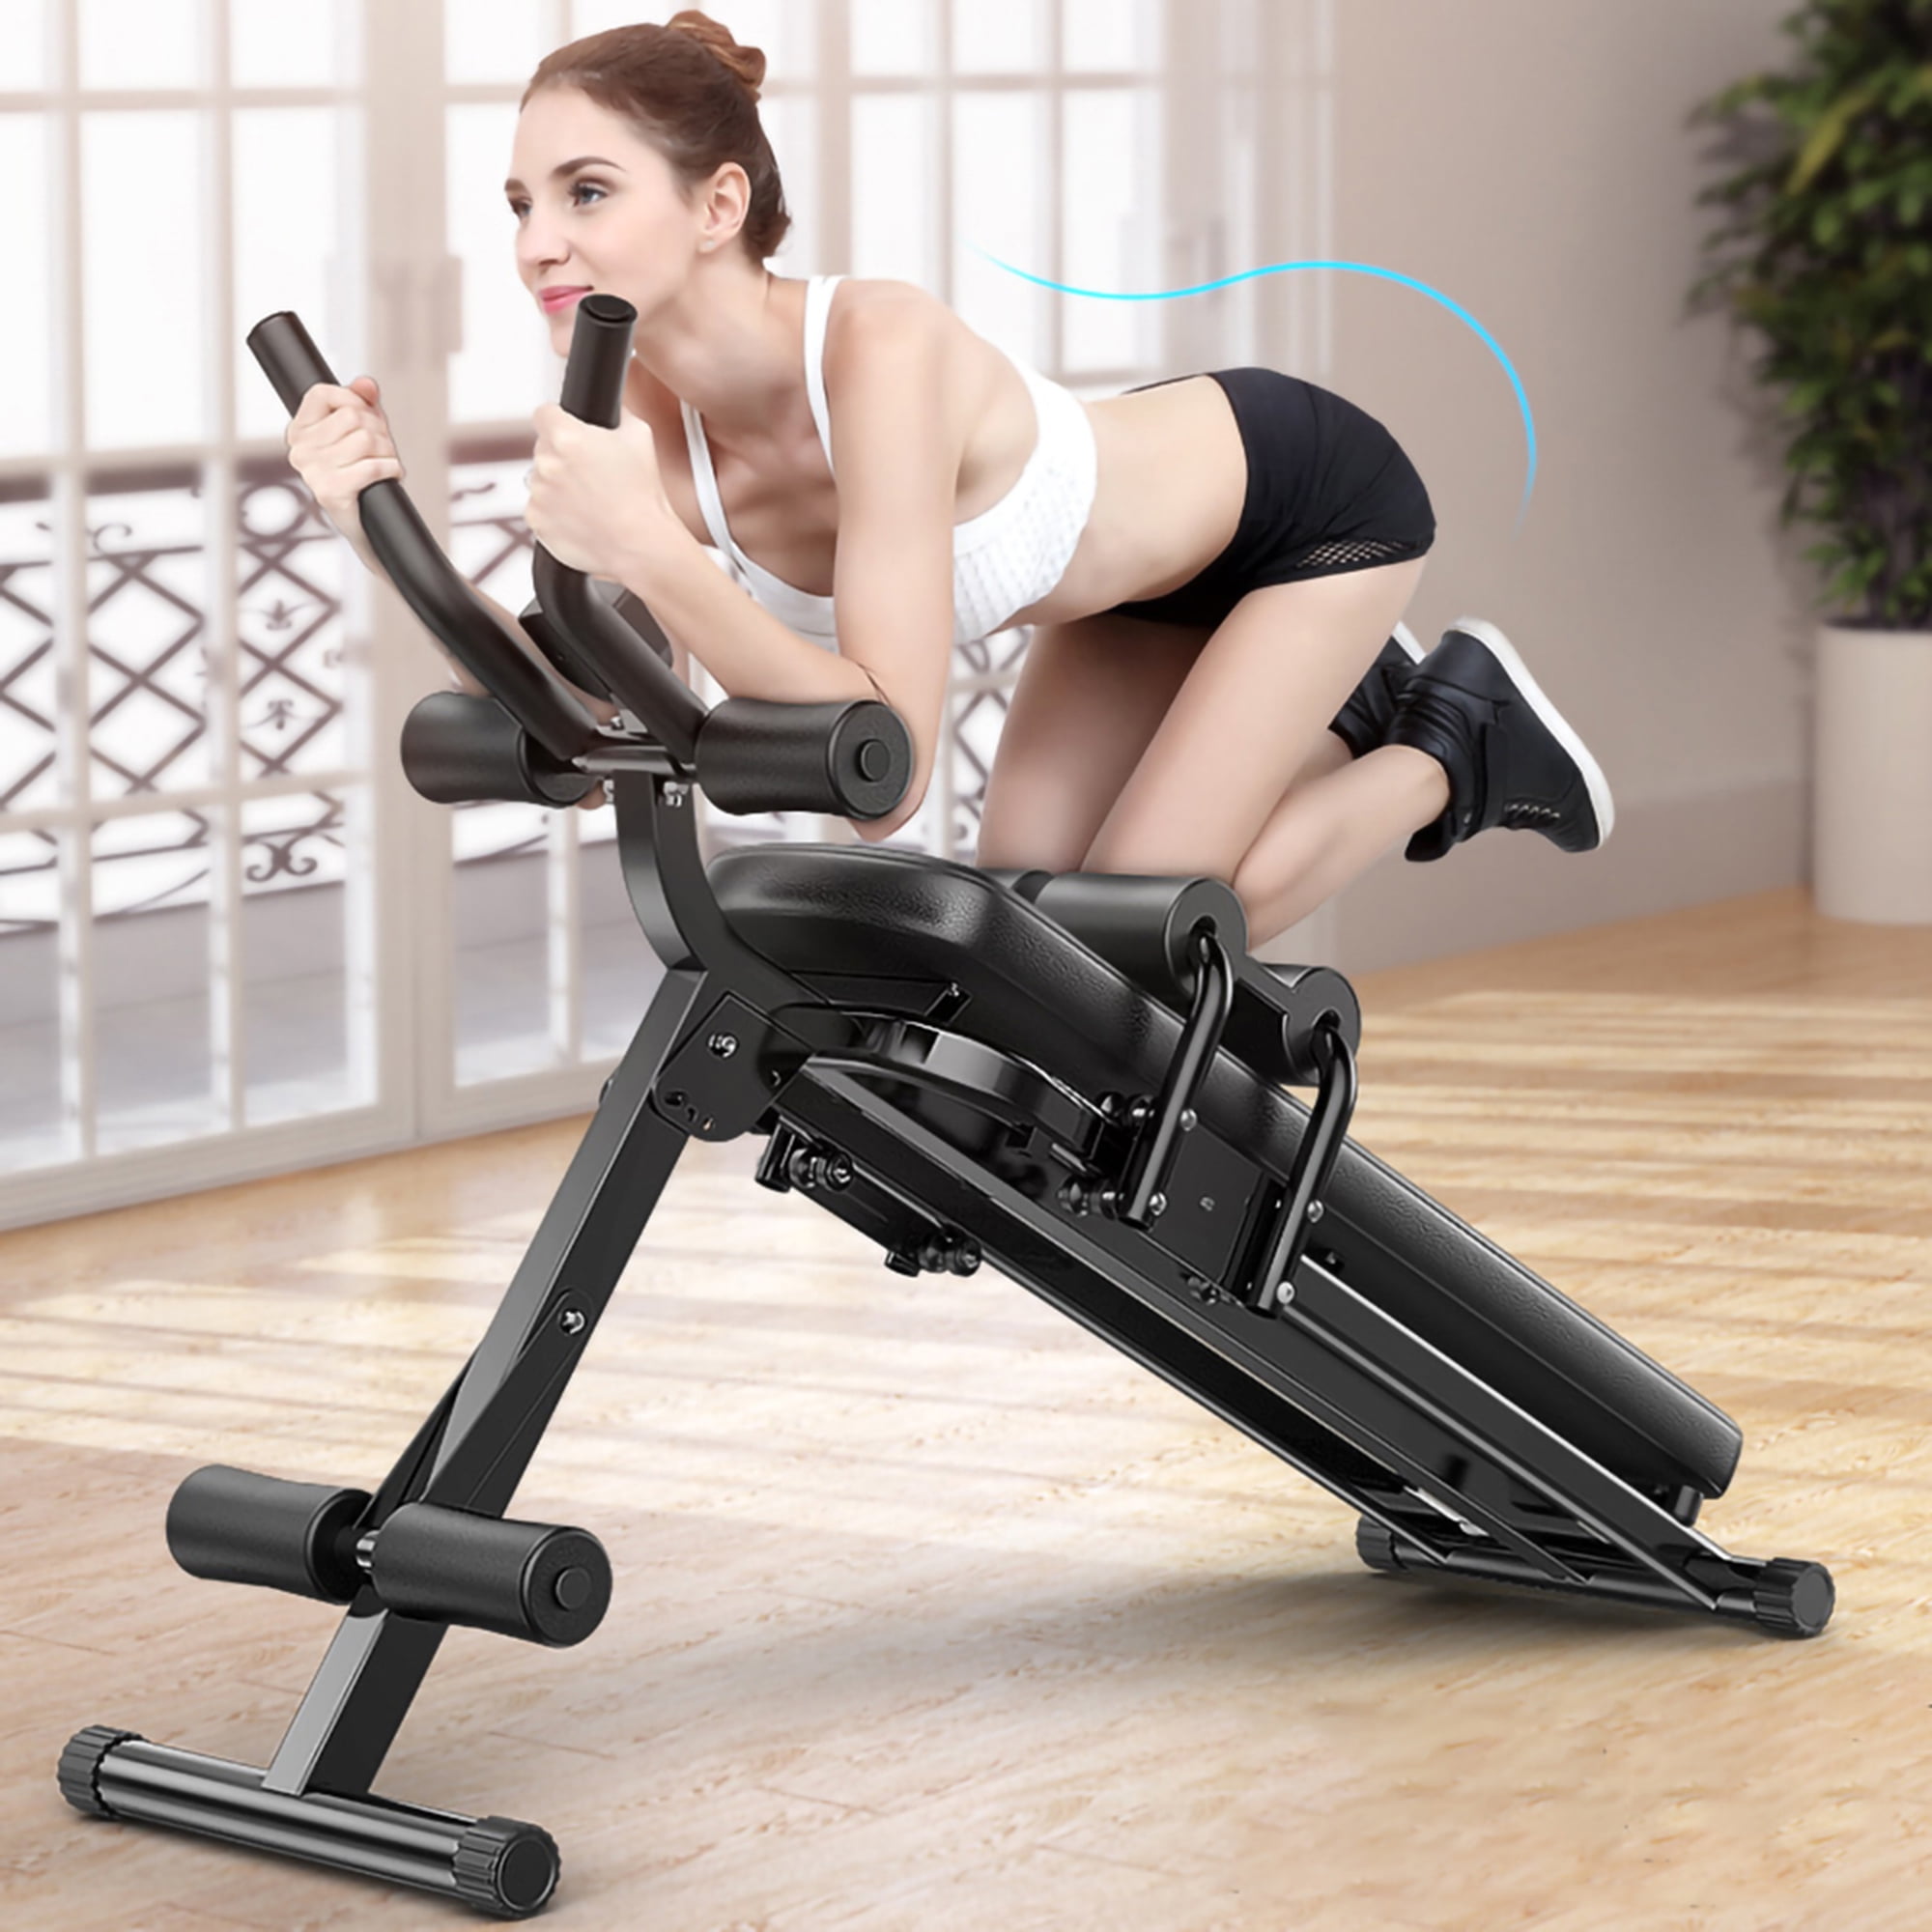 Mikat Sit Up Bench Full Body Foldable Multifunctional Exercise Machines for Home Gym Abdominal Exercise Equipment Ab Workout Equipment for Women and Men with LCD Monitor 